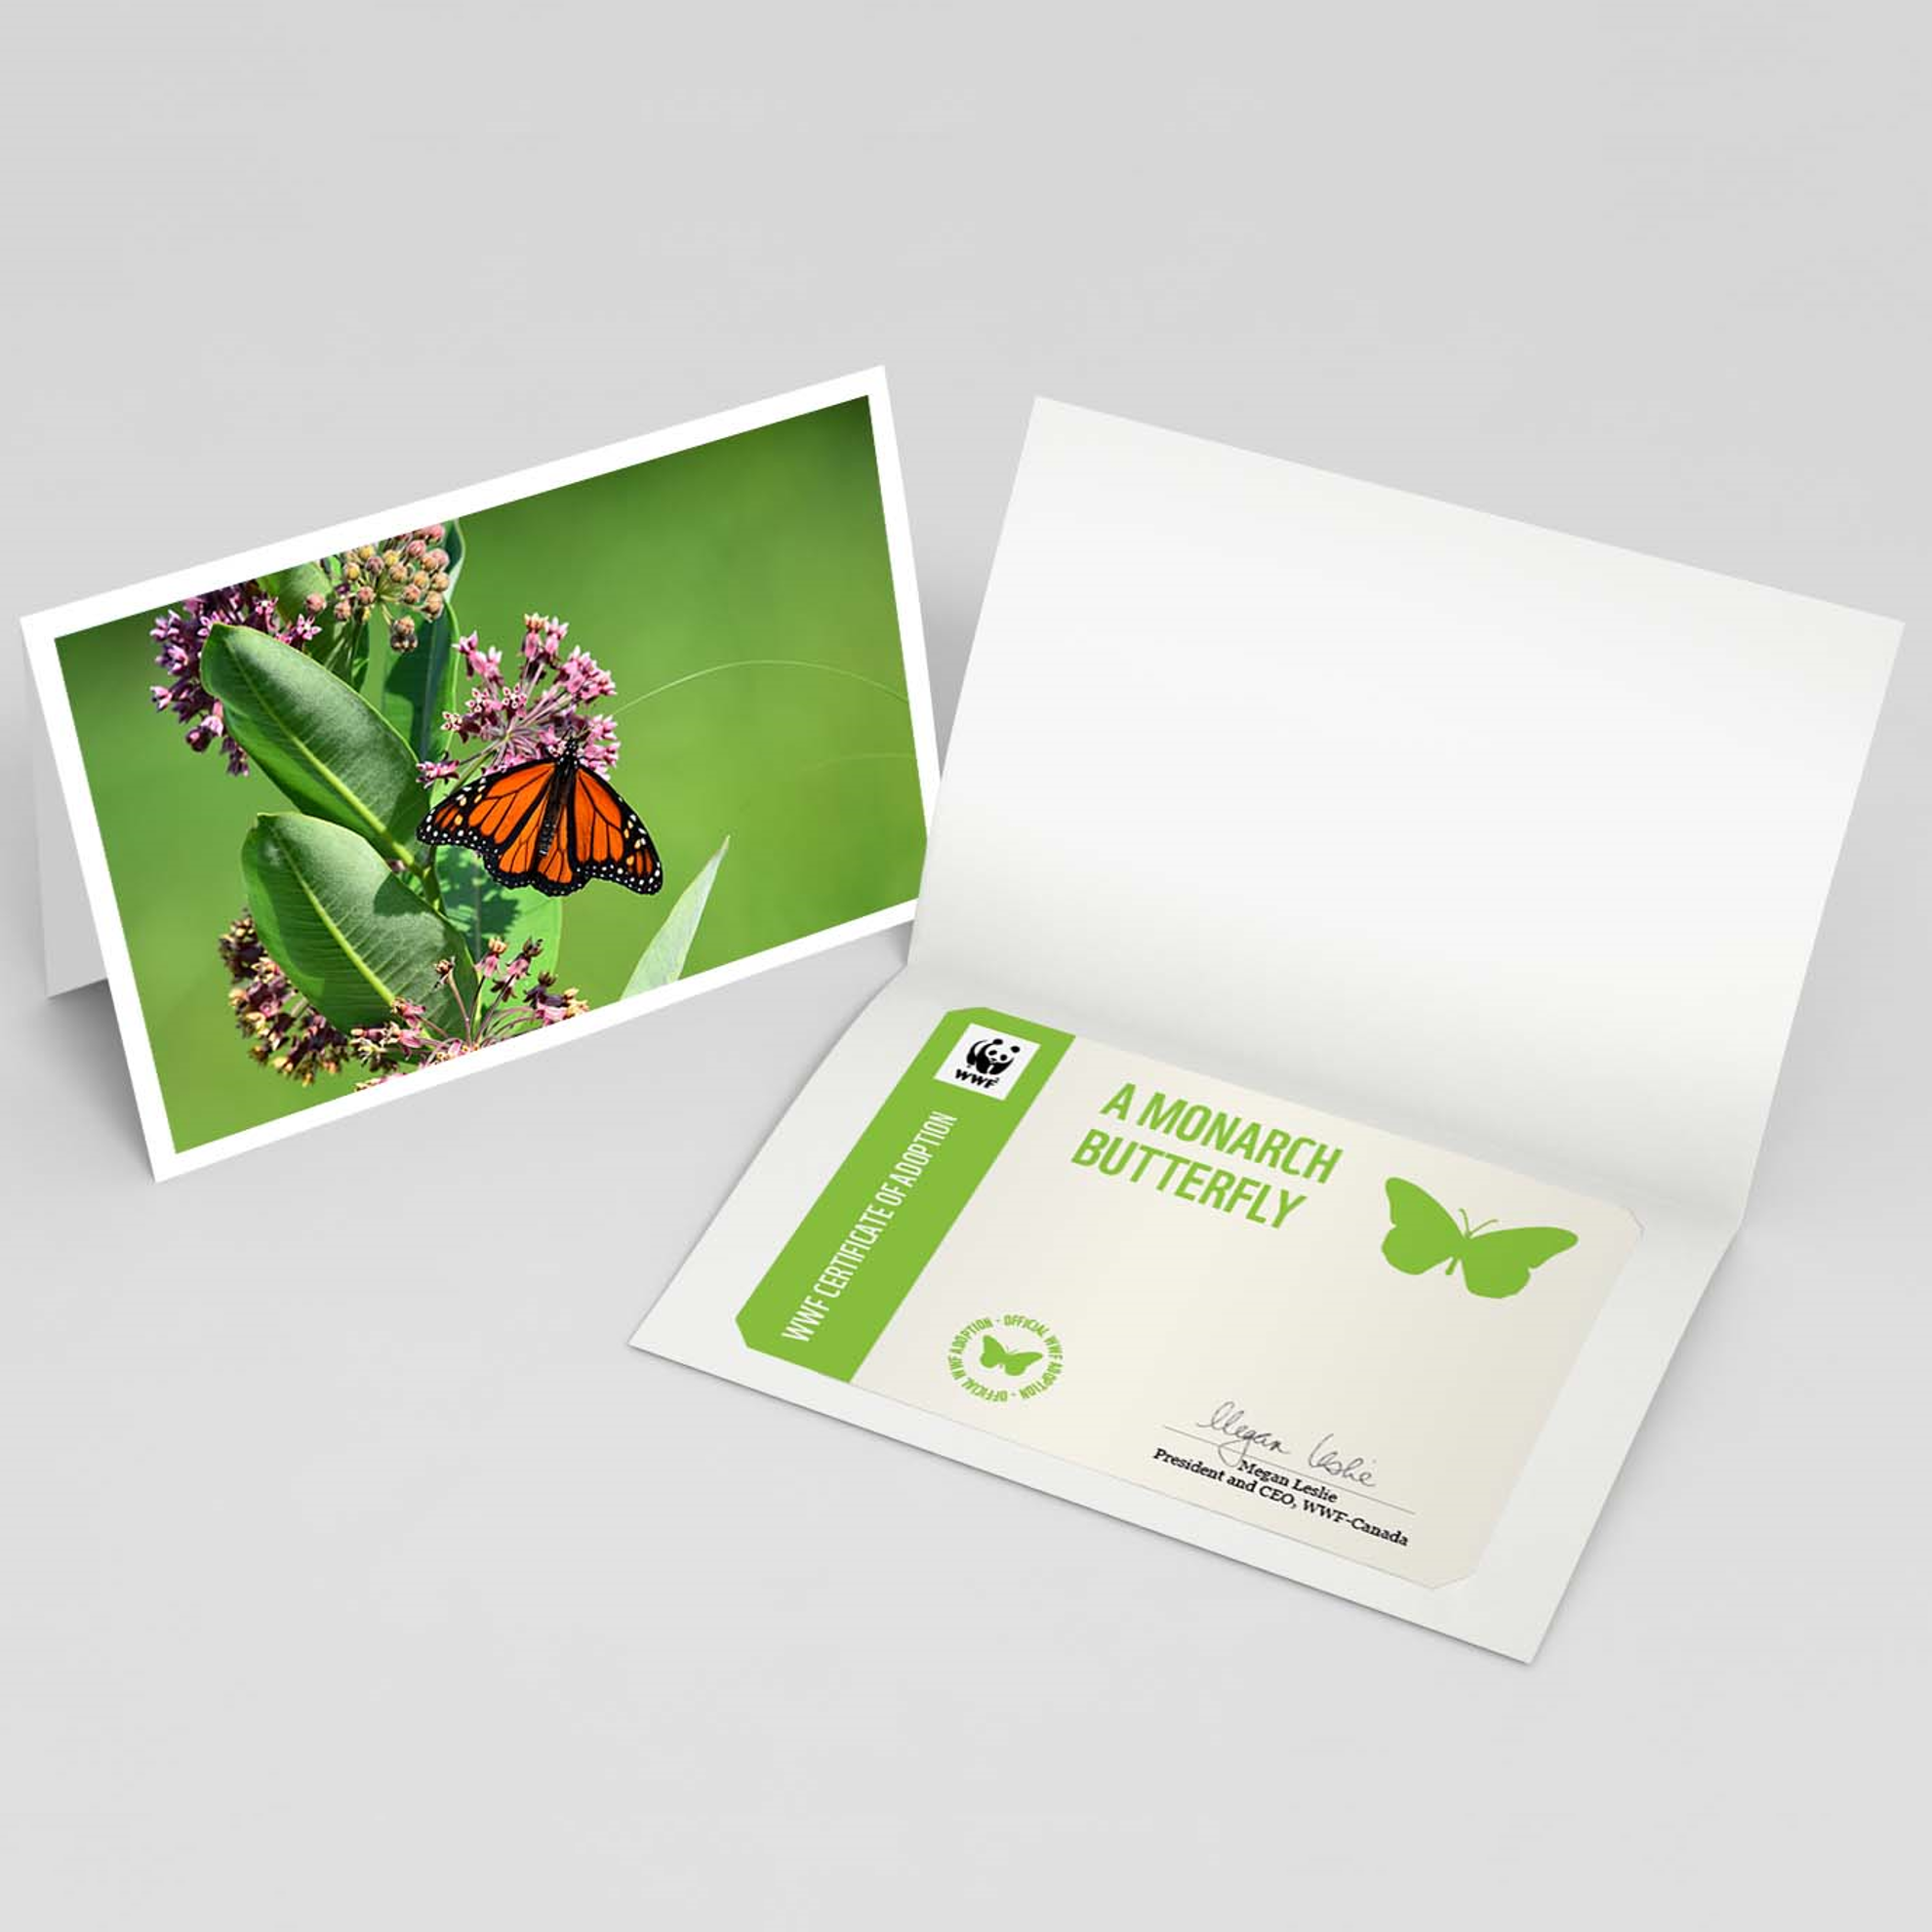 Pictured on the left is the monarch butterfly adoption card cover featuring a picture of a monarch butterfly on a plant. Beside it is the inside of the adoption card containing a monarch butterfly adoption certificate template.